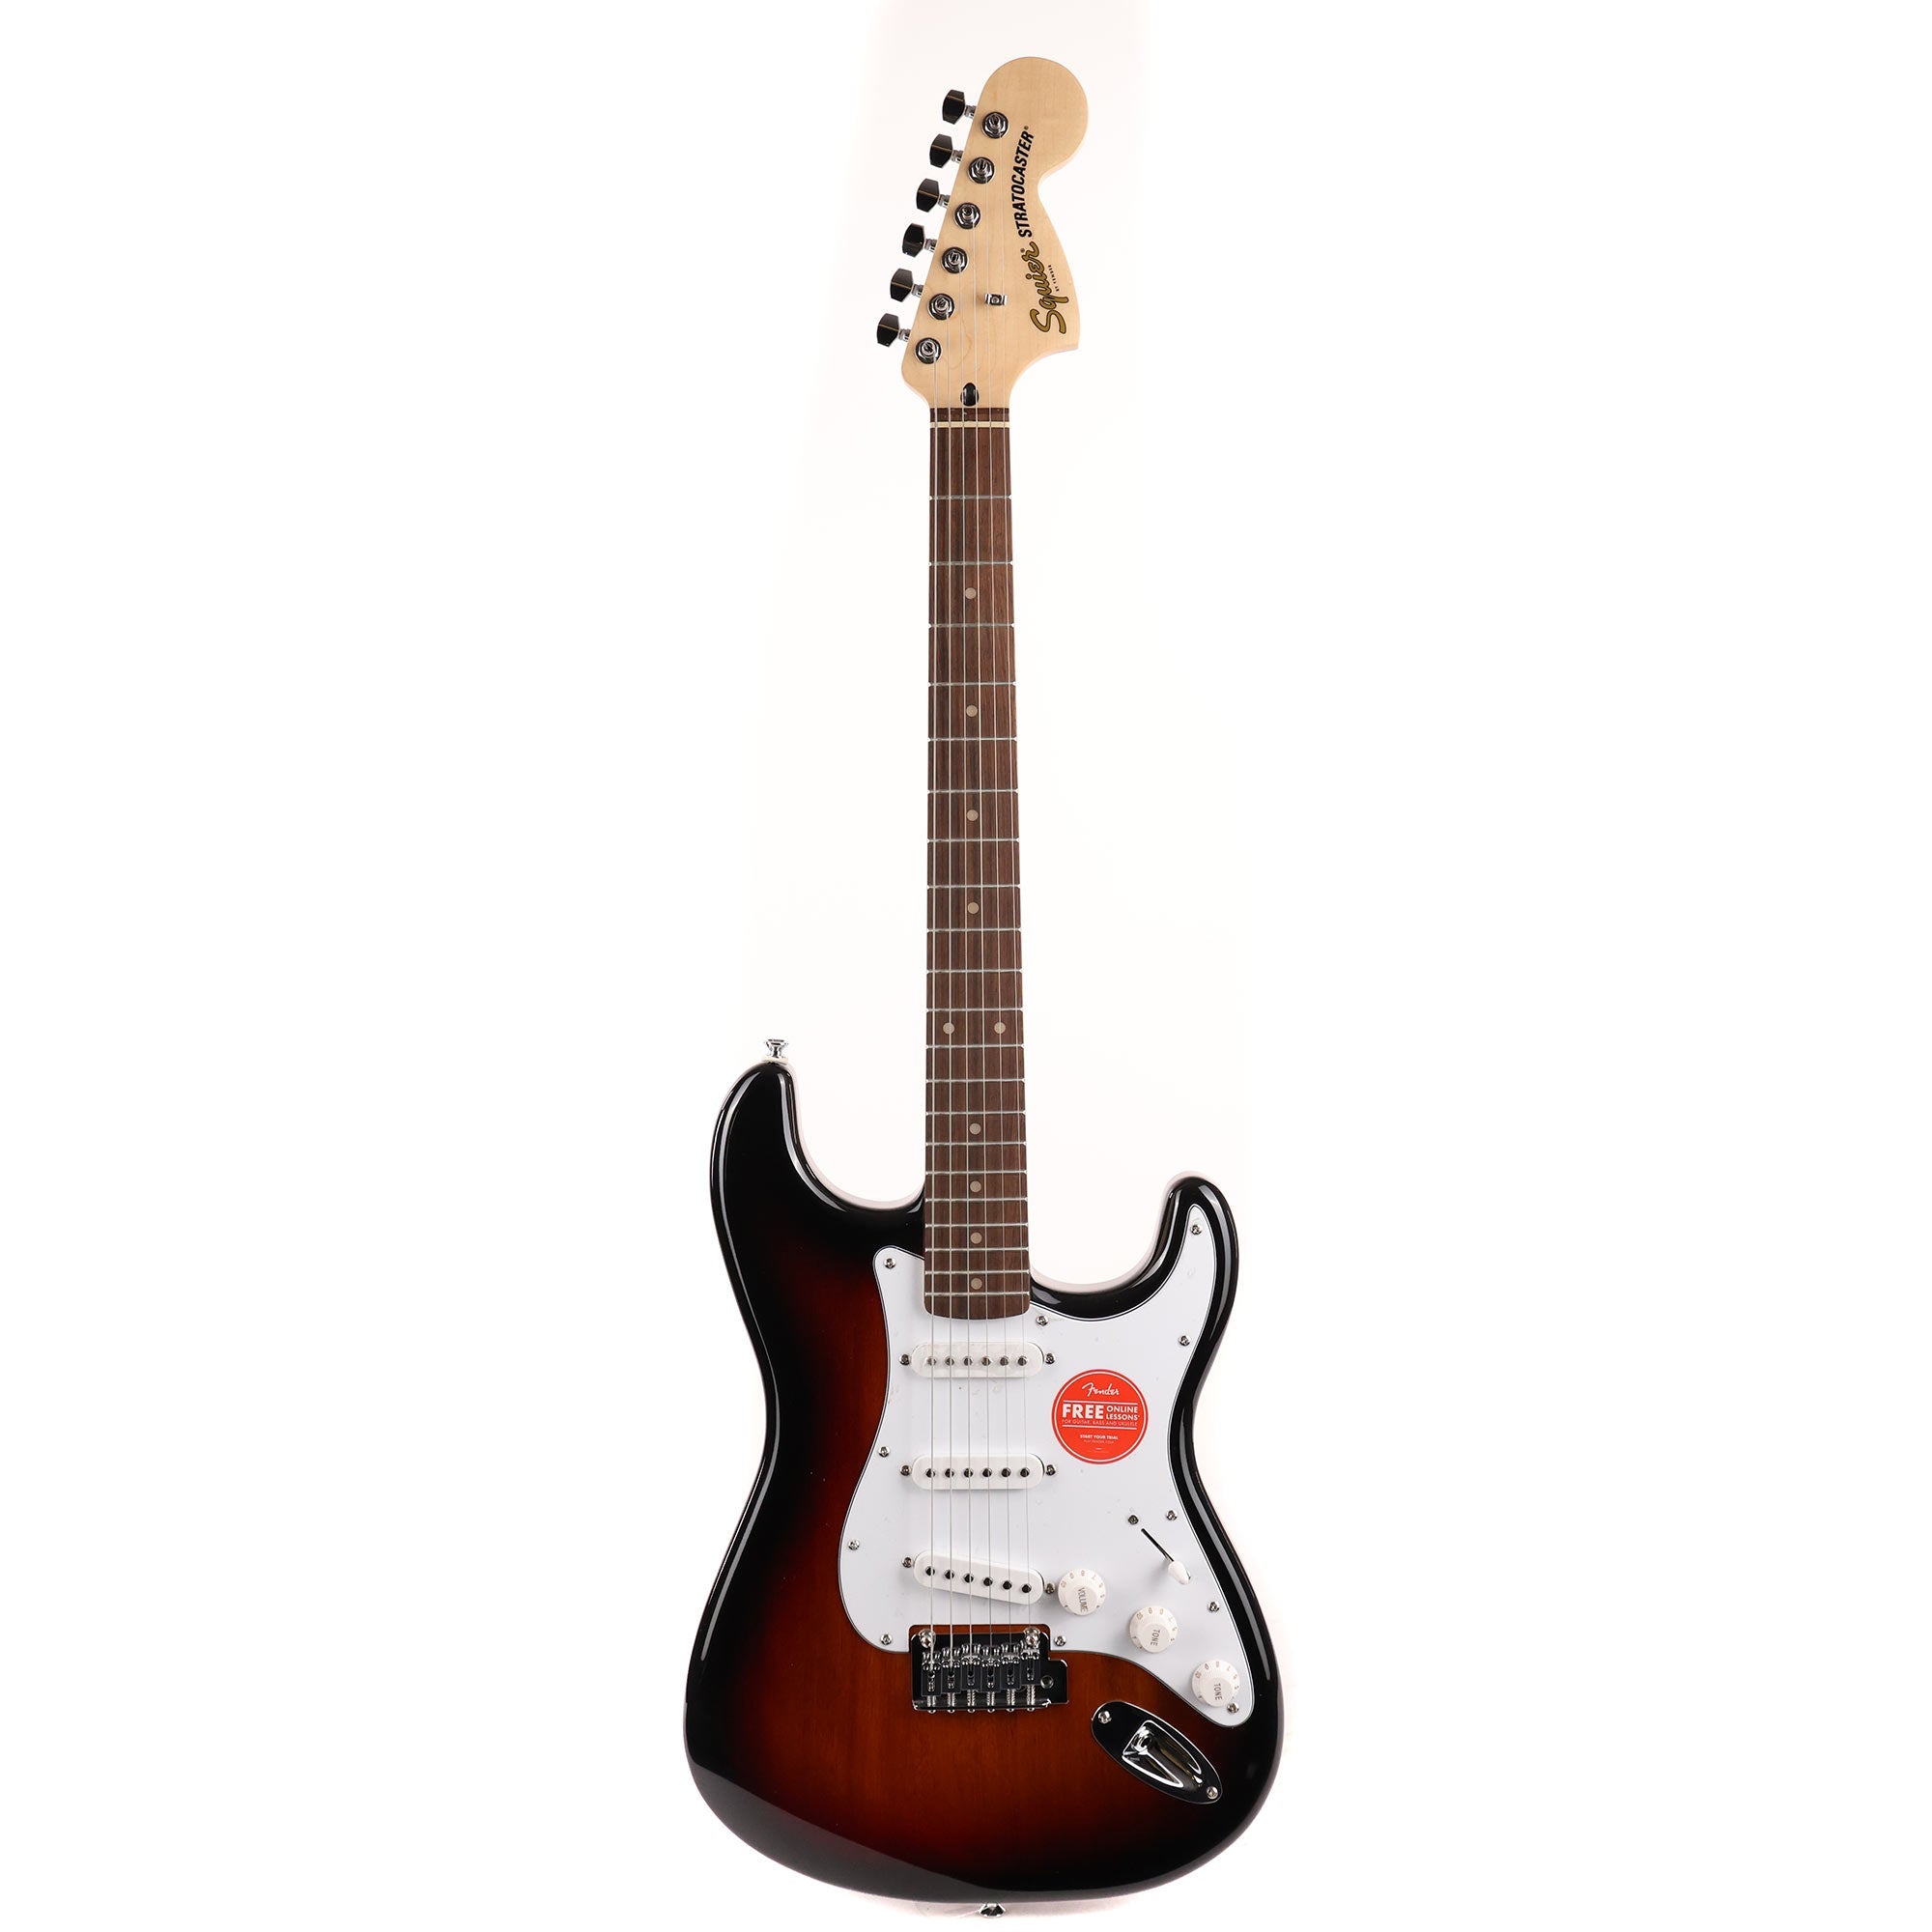 Squier Affinity Series Stratocaster 3-Color Sunburst Used | The 